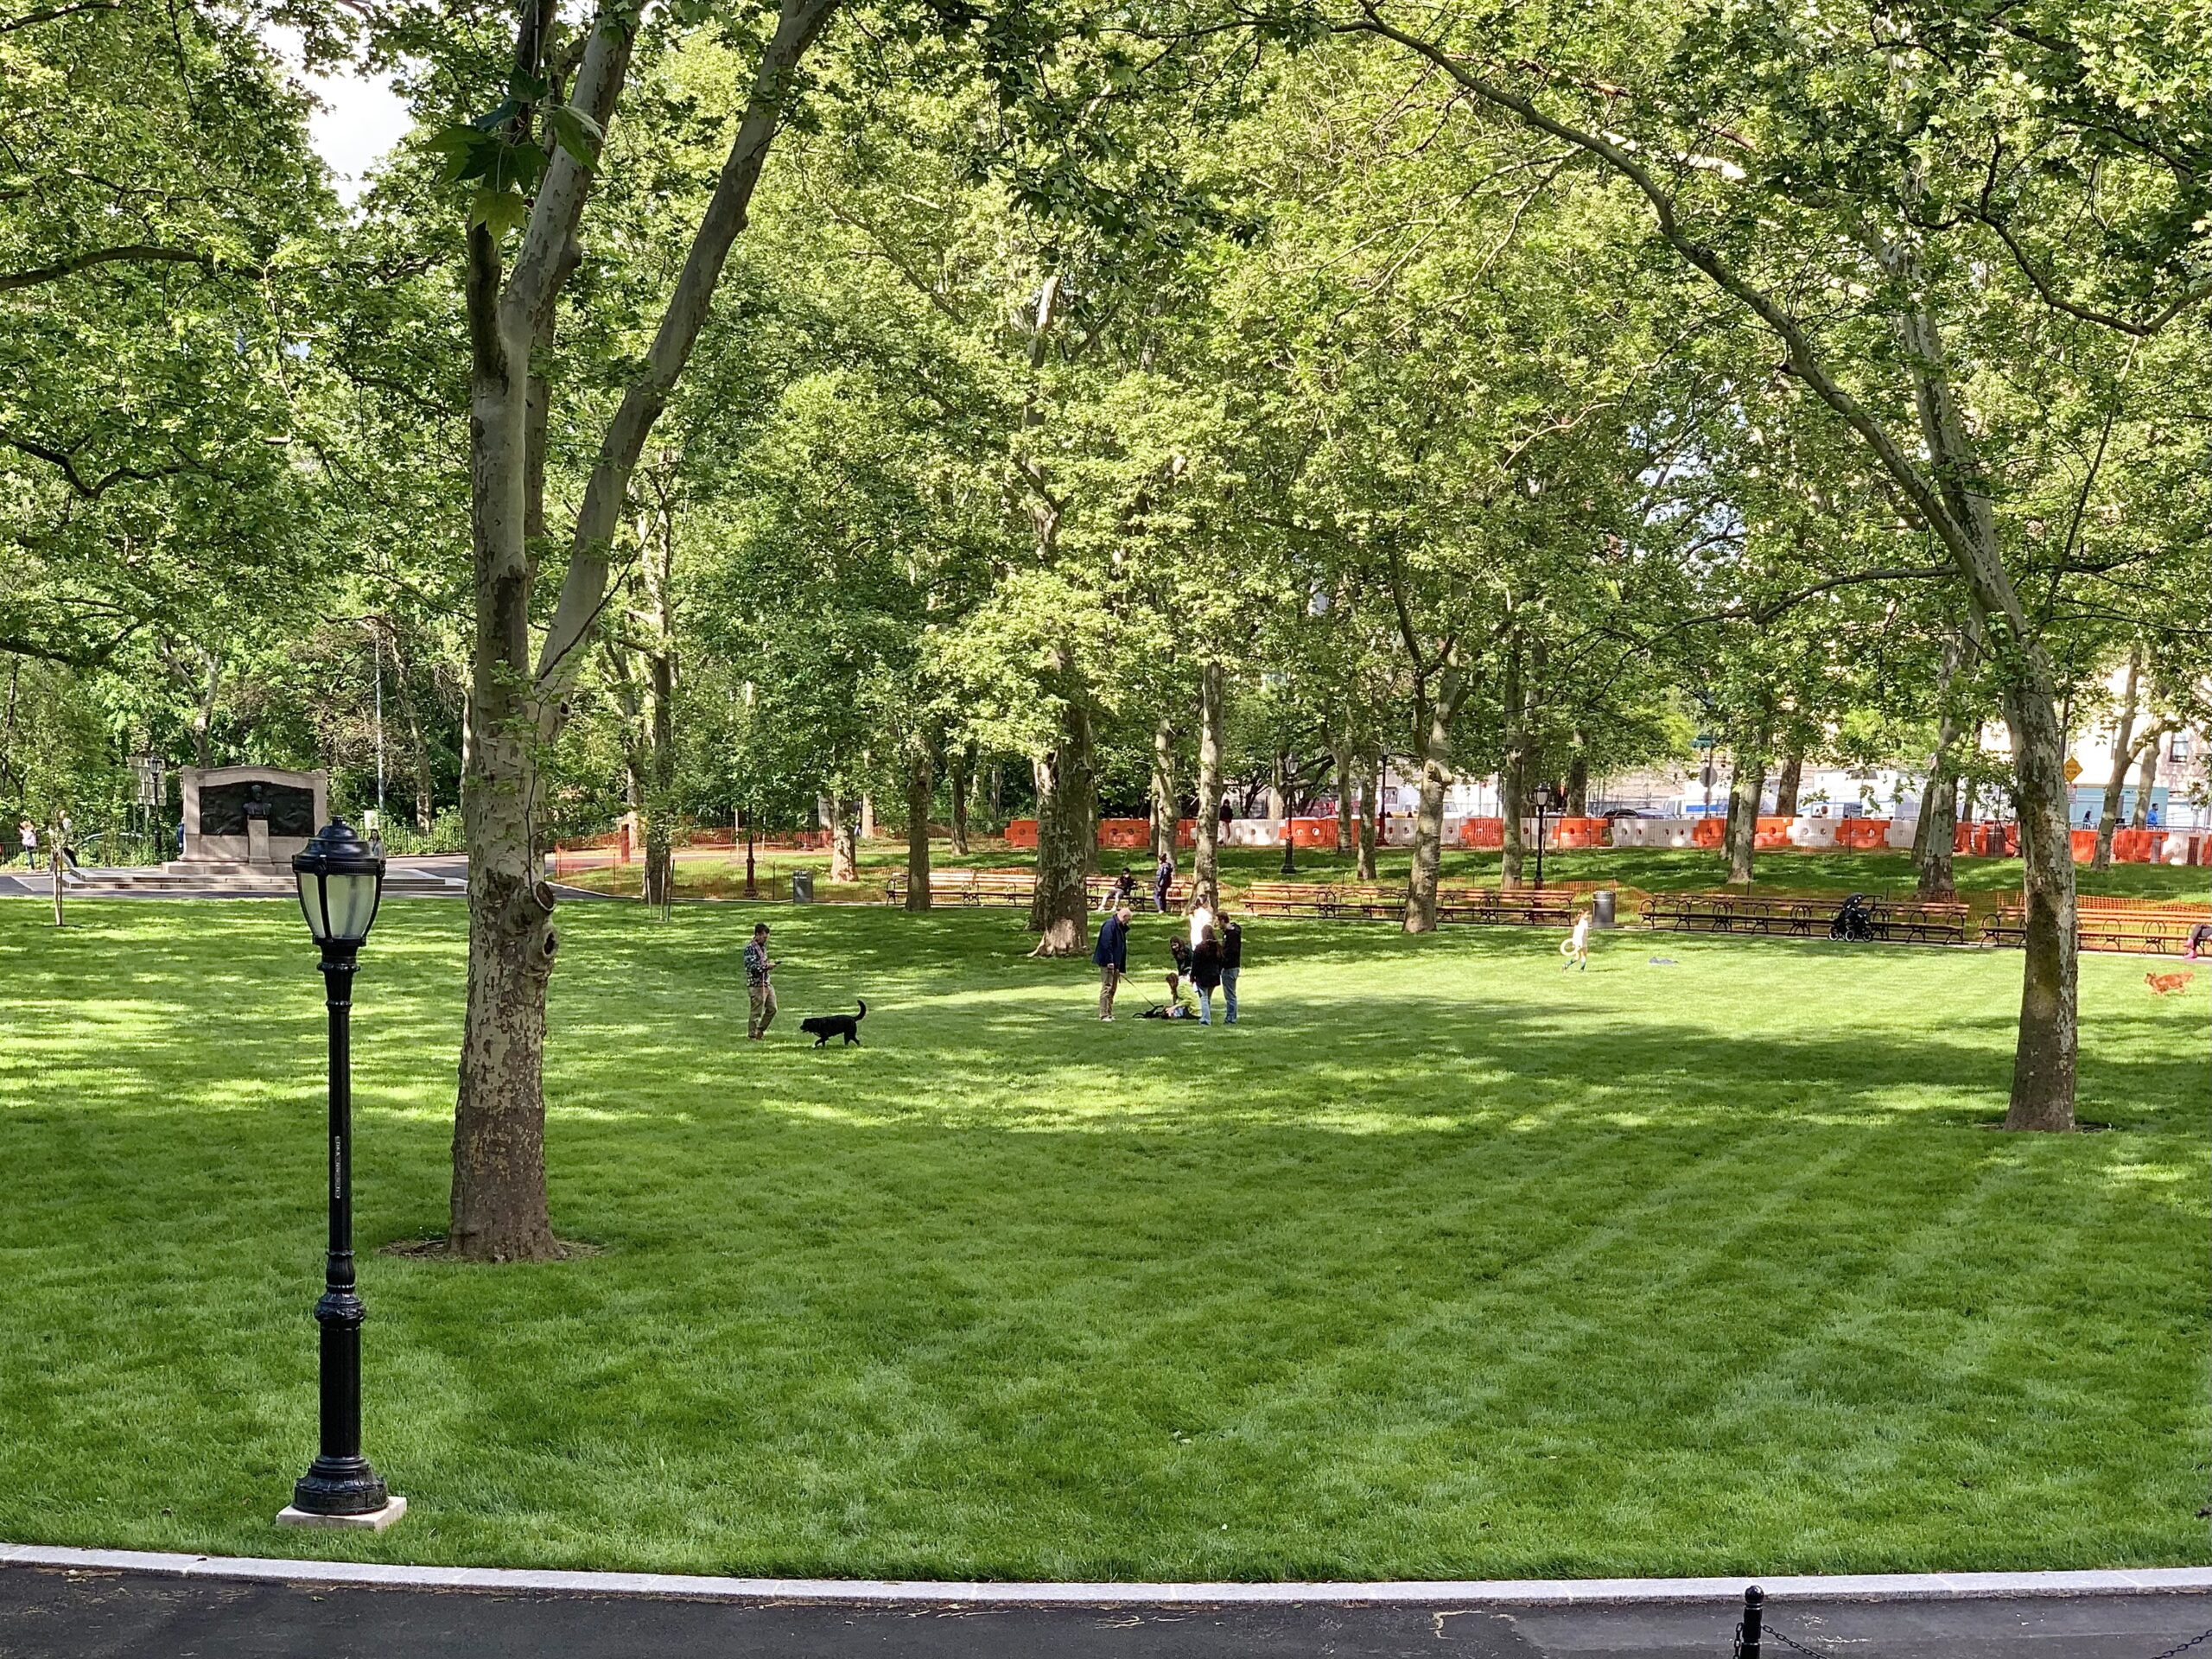 After more than a year of construction, the shady oval at the north end of Cadman Plaza Park opened Friday.